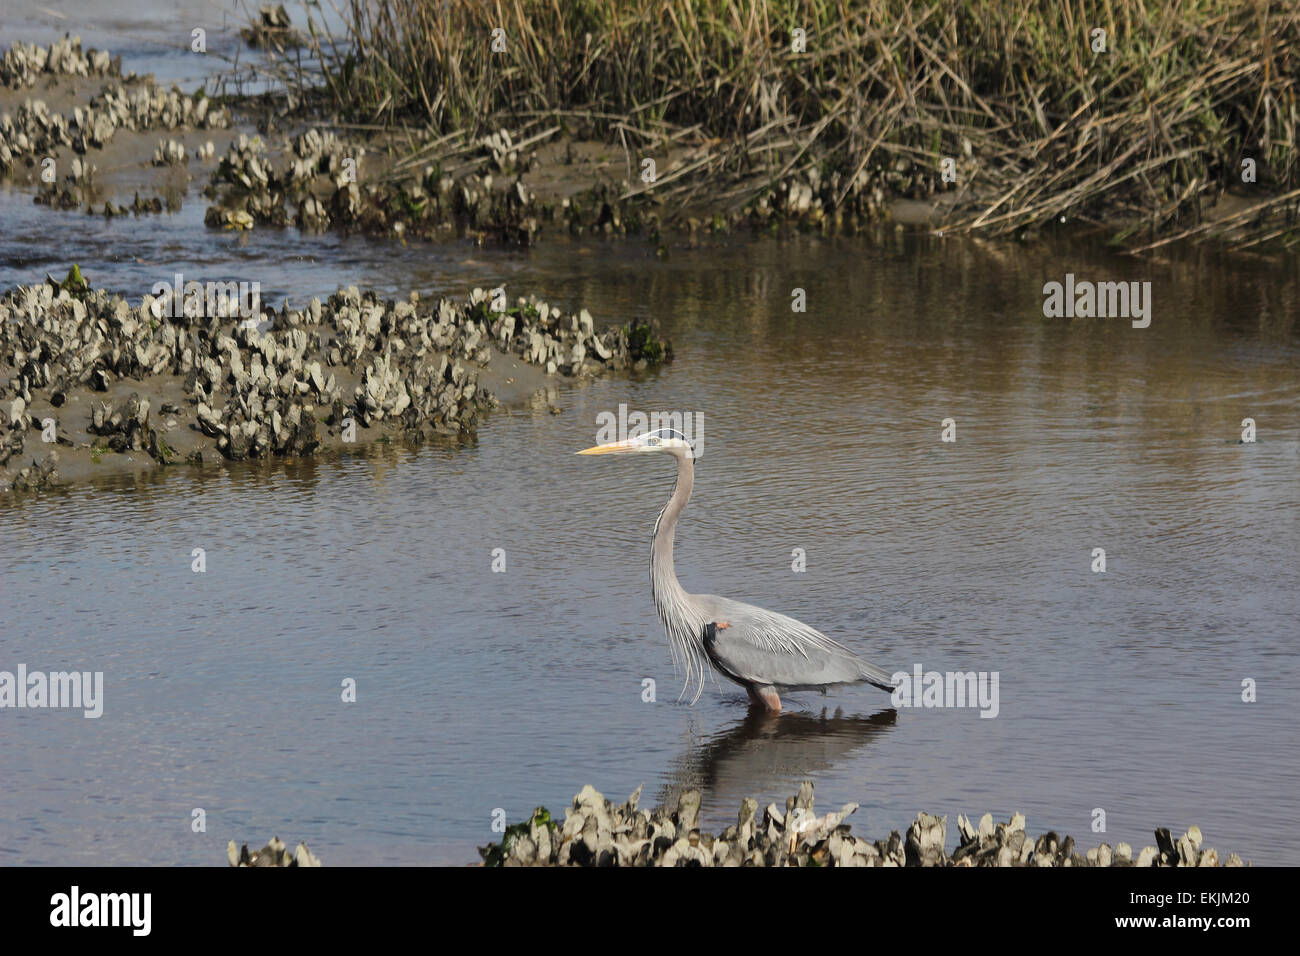 A Great blue heron with all of its plumage proudly wades in a coastal estuary. Stock Photo